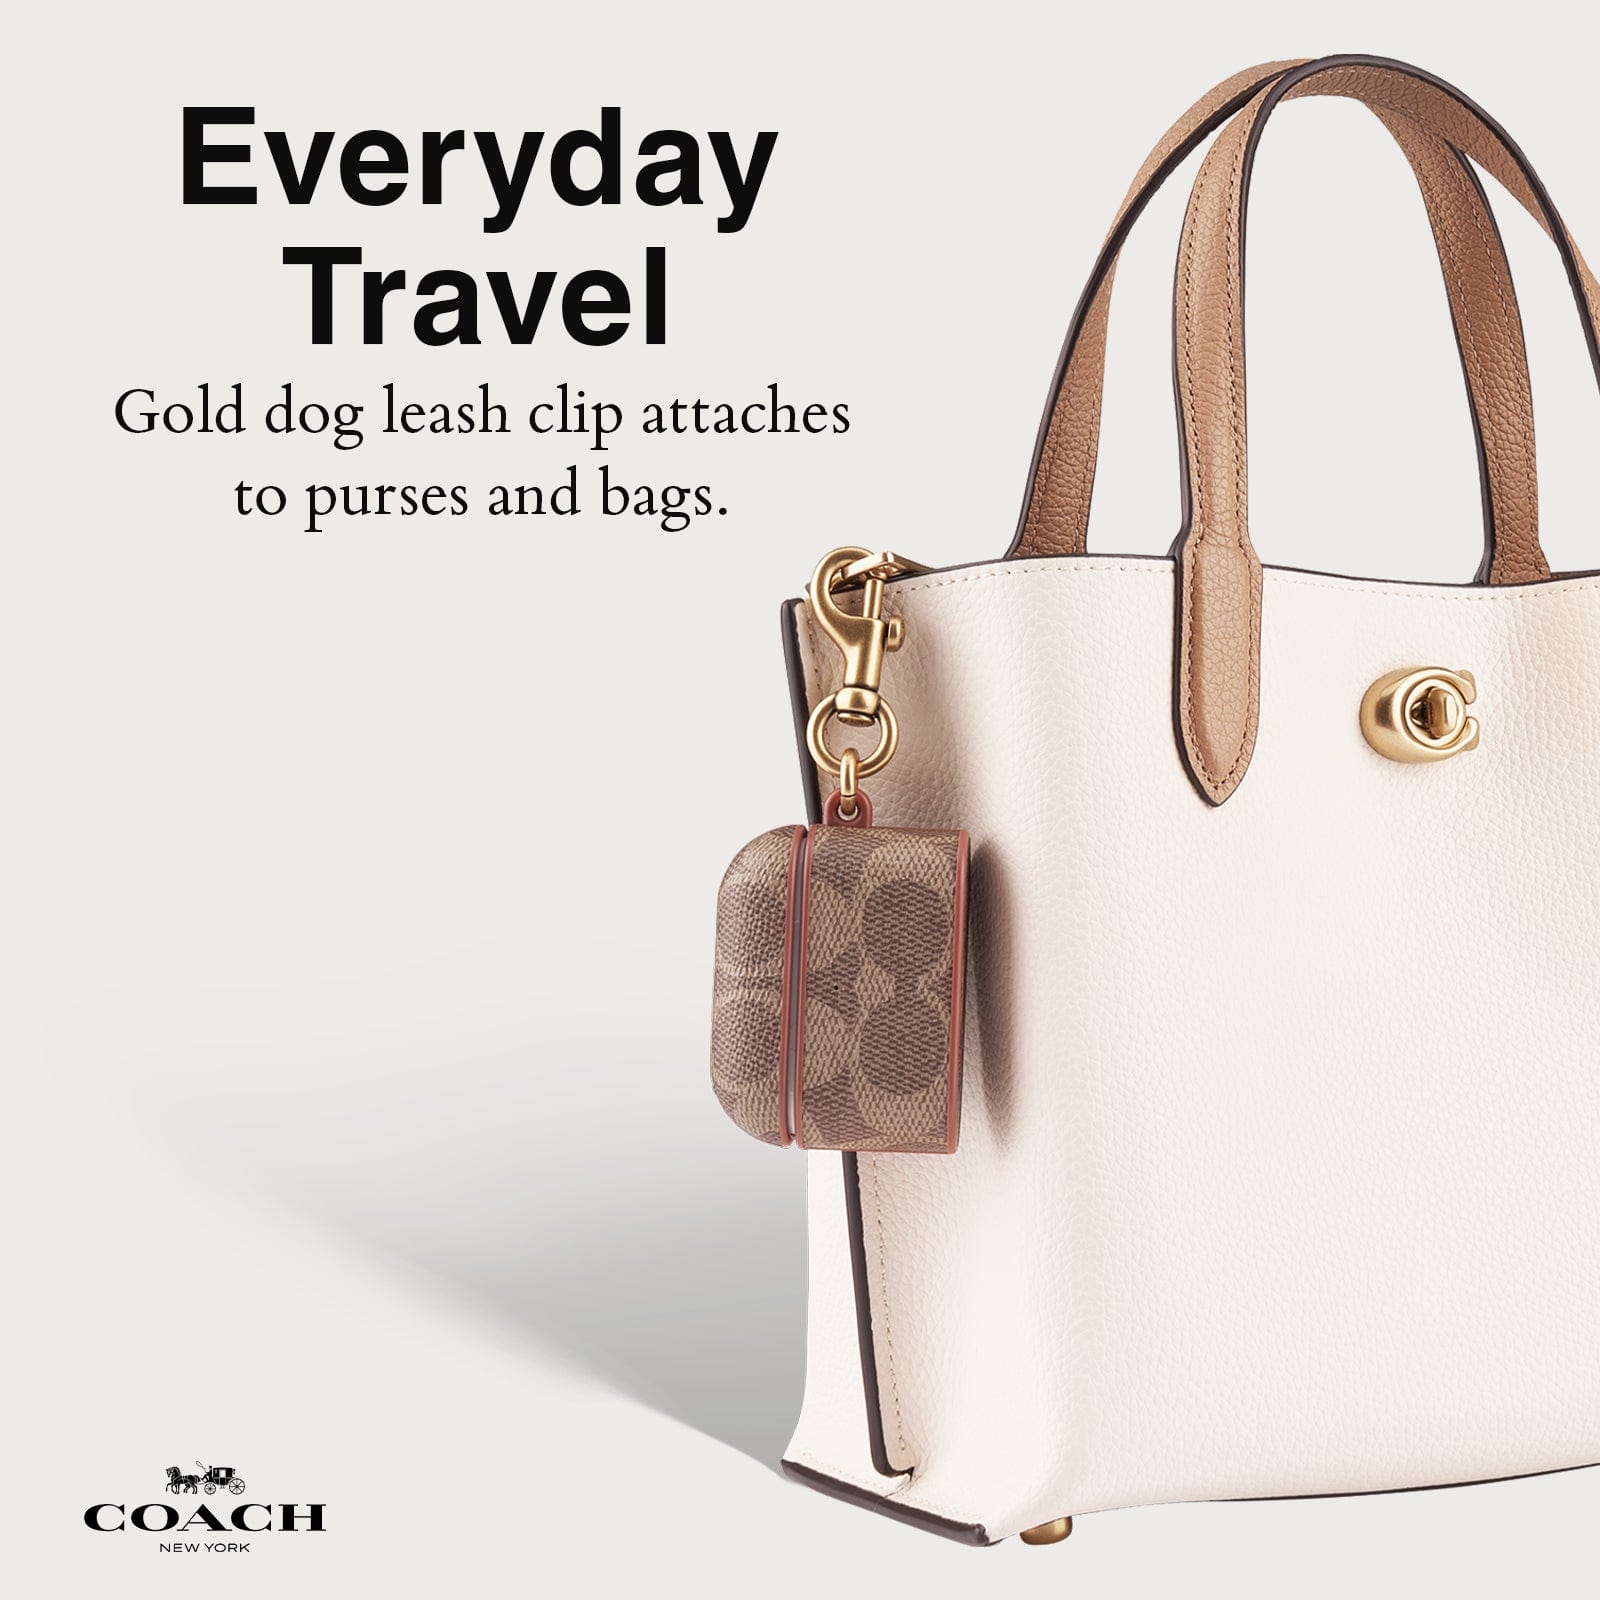 EVERYDAY TRAVEL. GOLD DOG LEASH CLIP ATTACHES TO PURSES AND BAGS